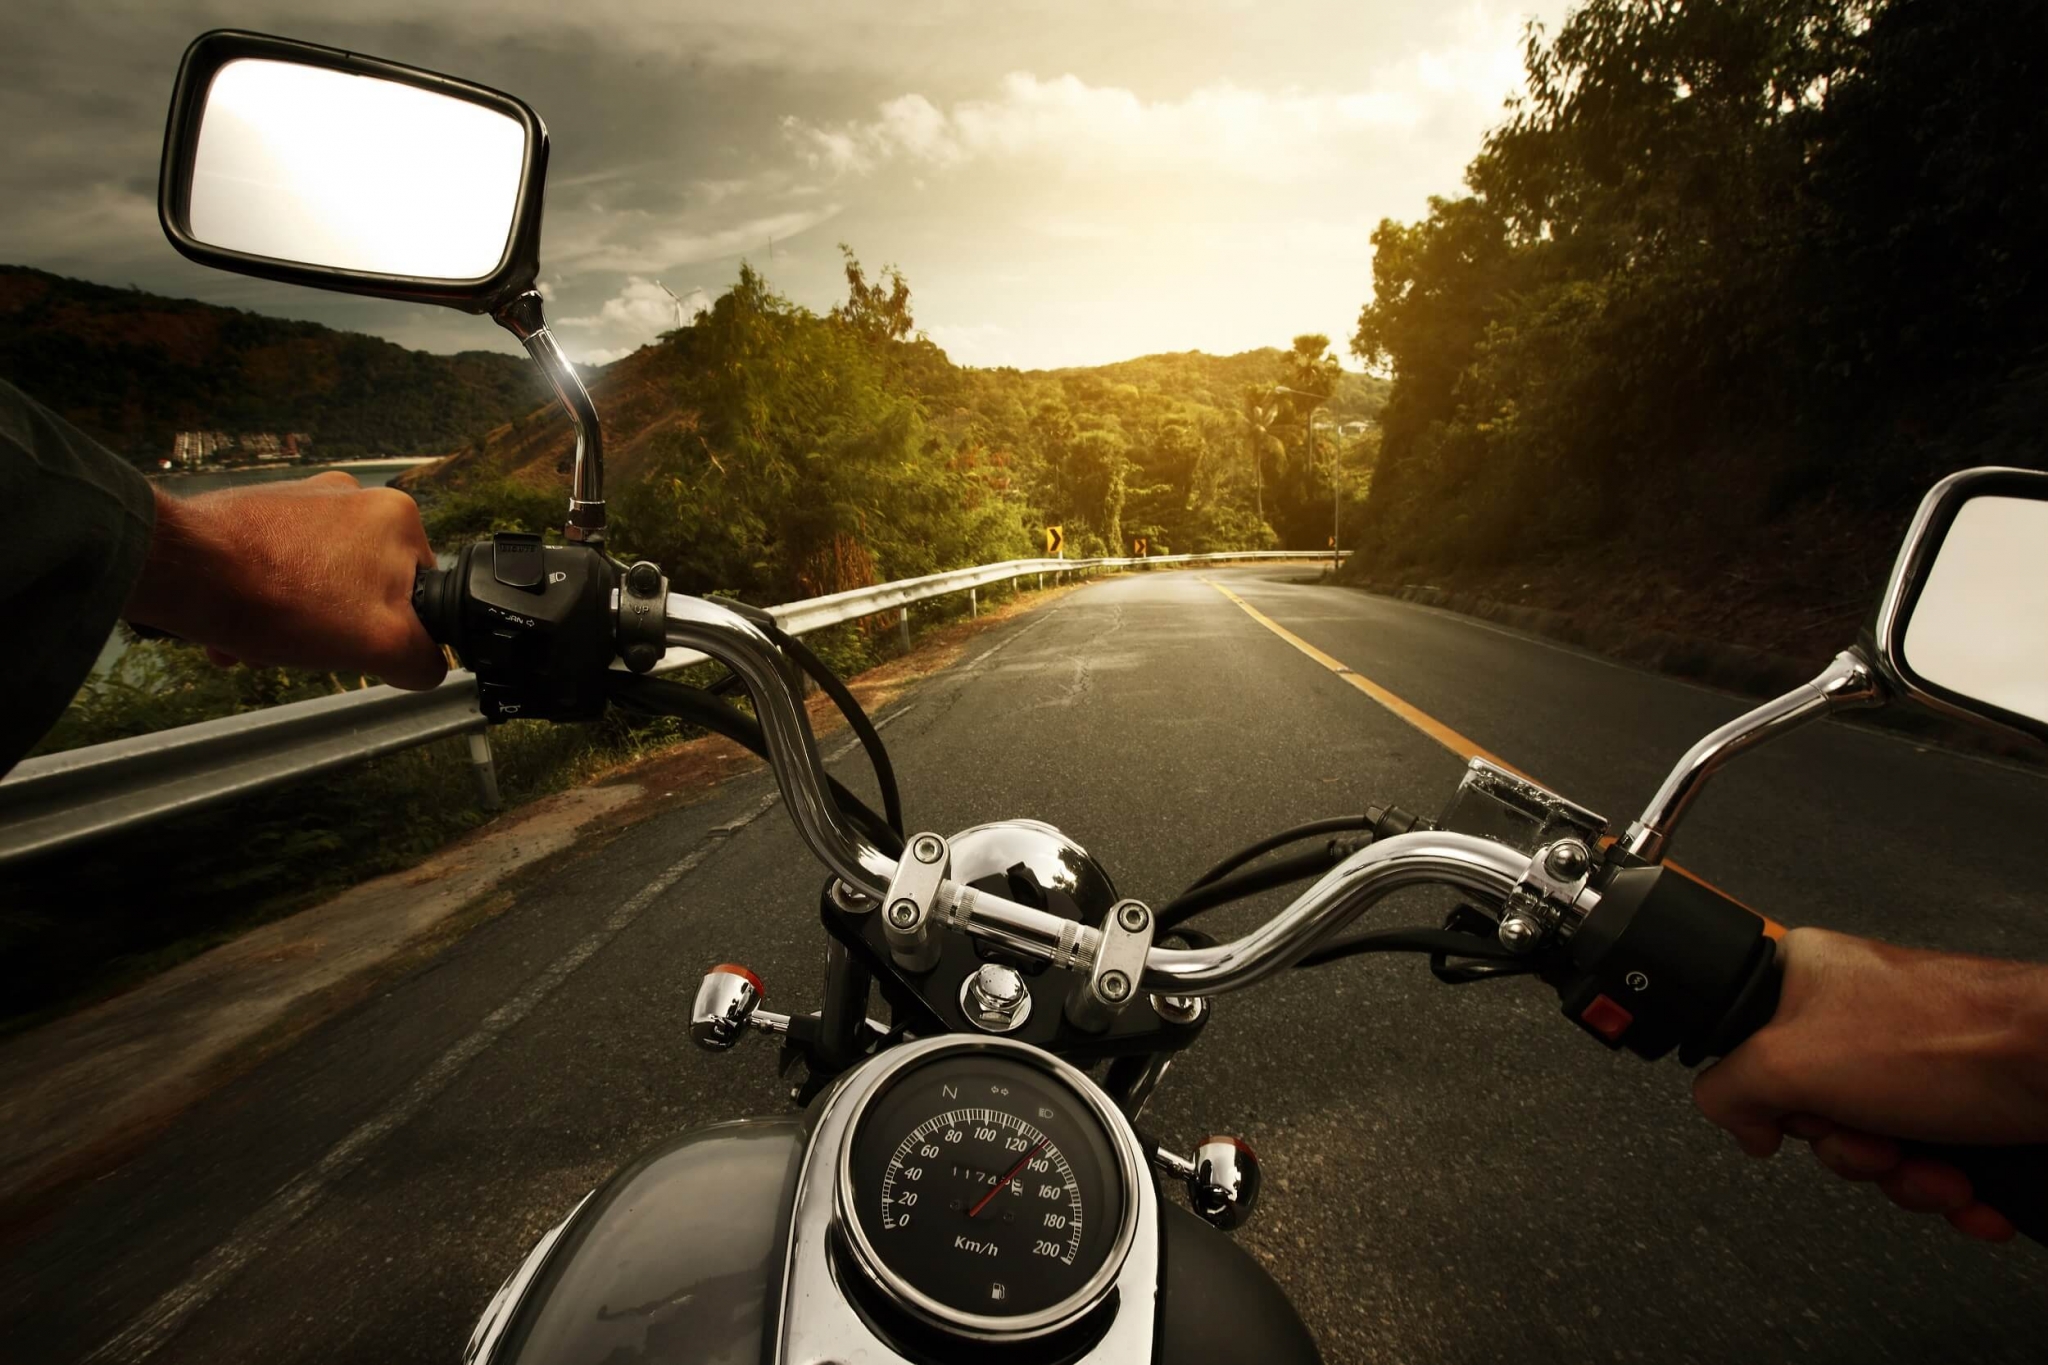 Europe motorcycle tours for adventure lovers - Book your package today!